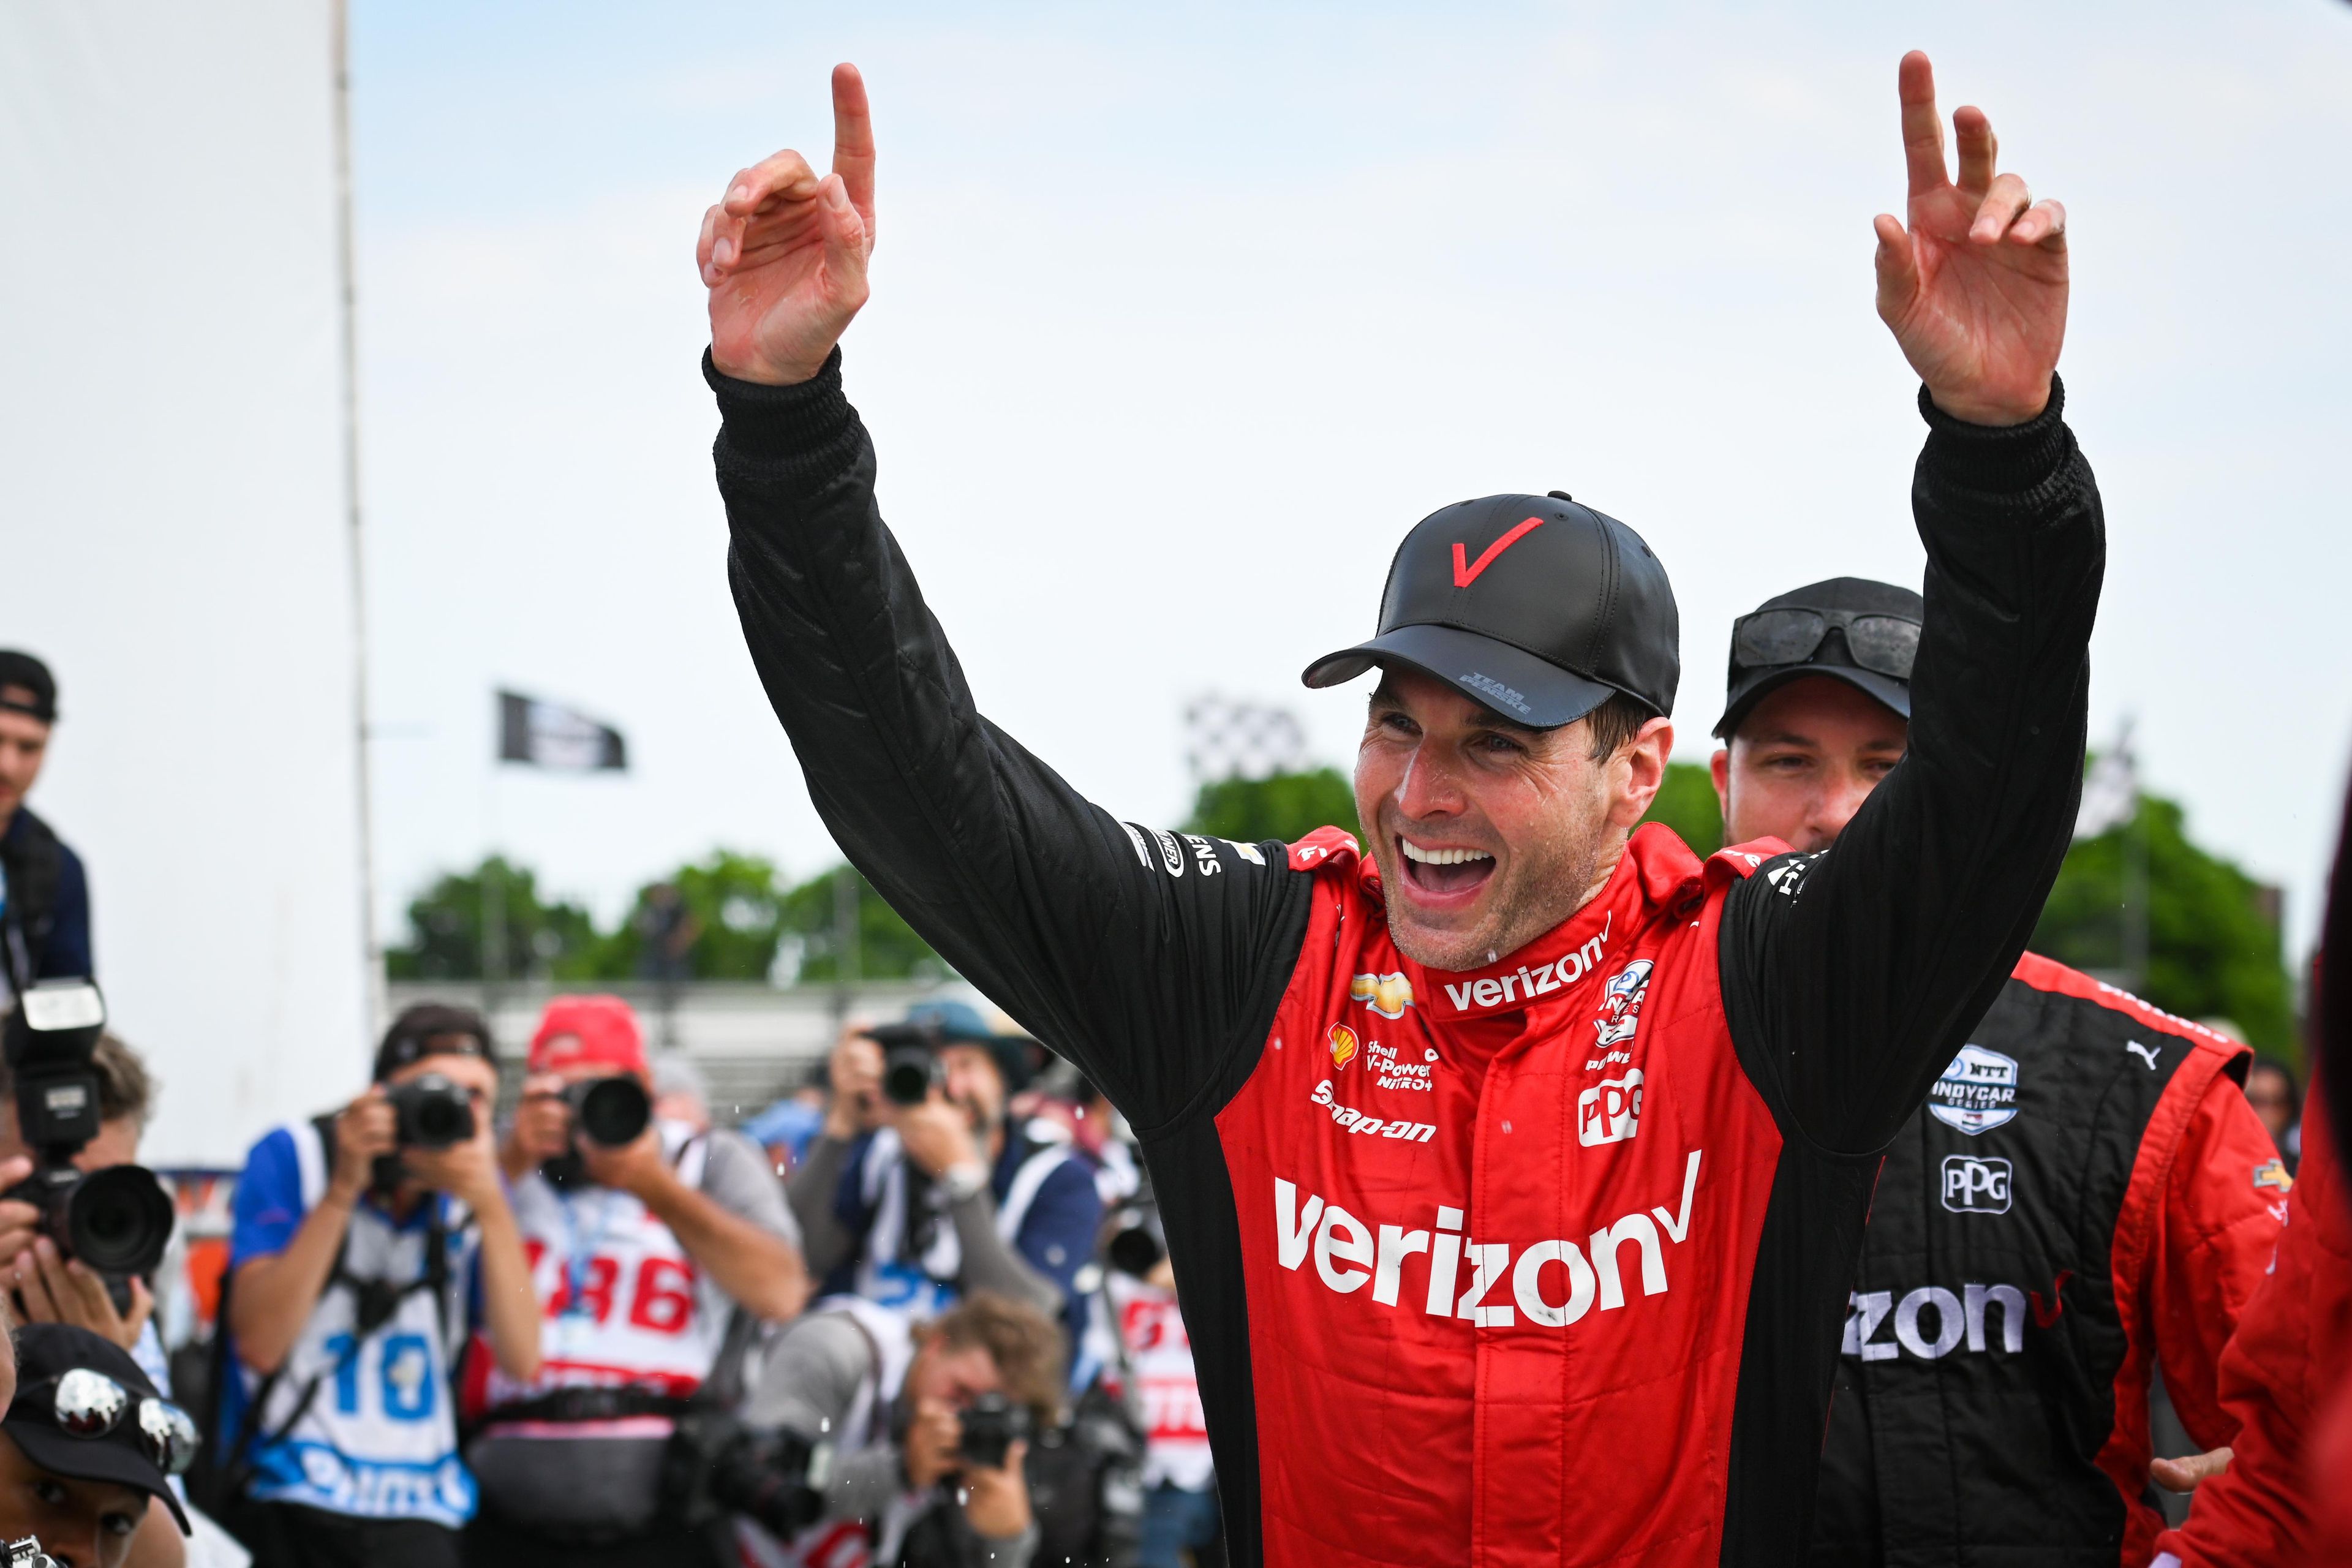 EXCLUSIVE: Championship leader Will Power 'mentally miles ahead' since last IndyCar title win